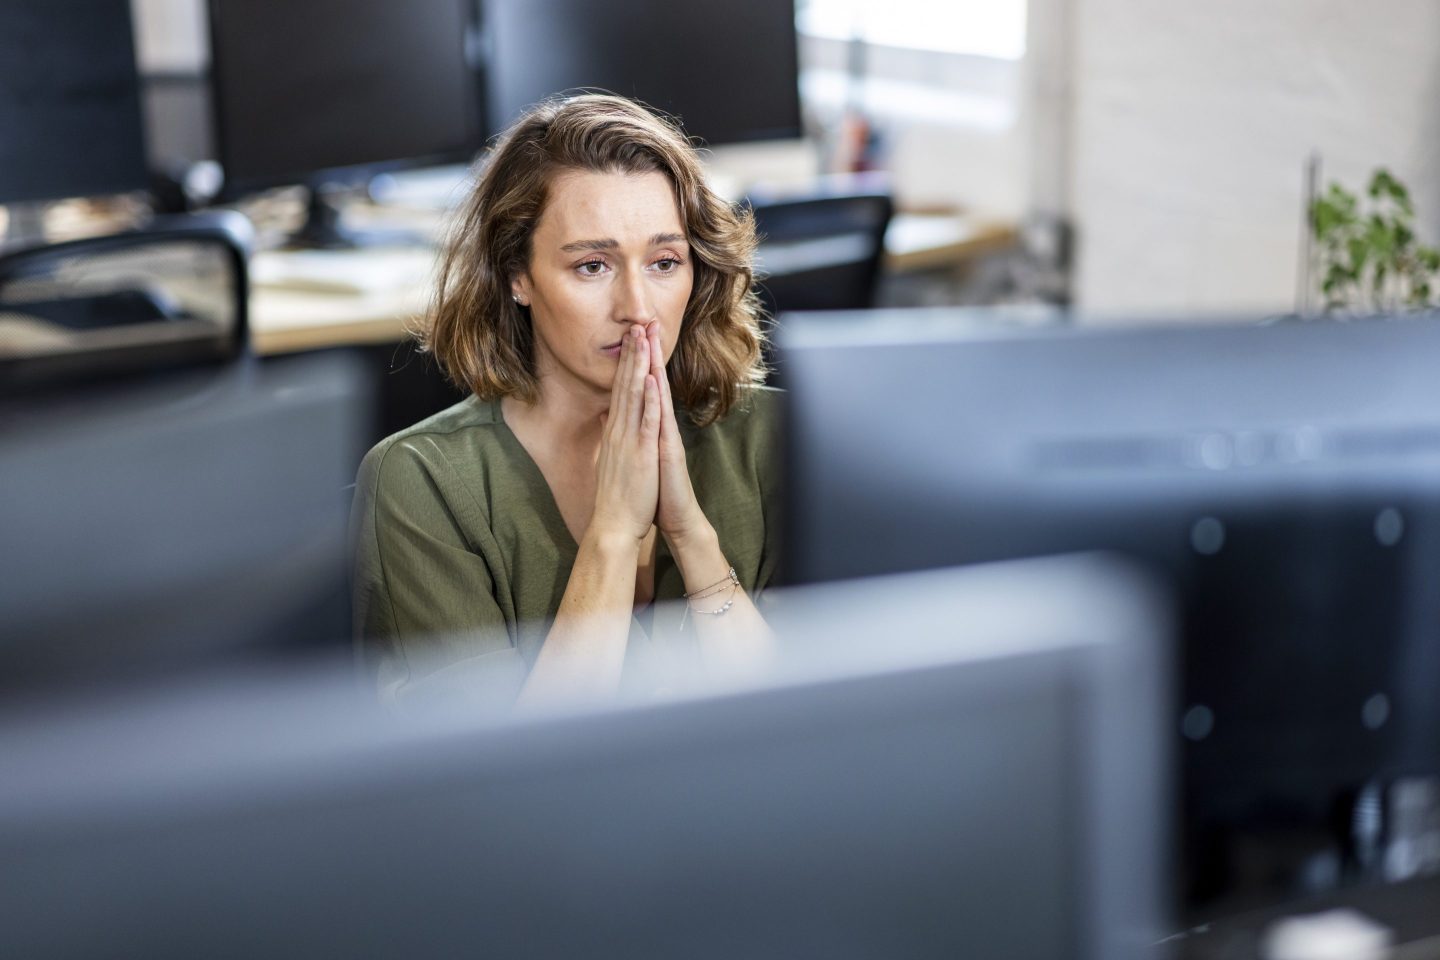 A stressed businesswoman sits in front of a desktop computer at an office.